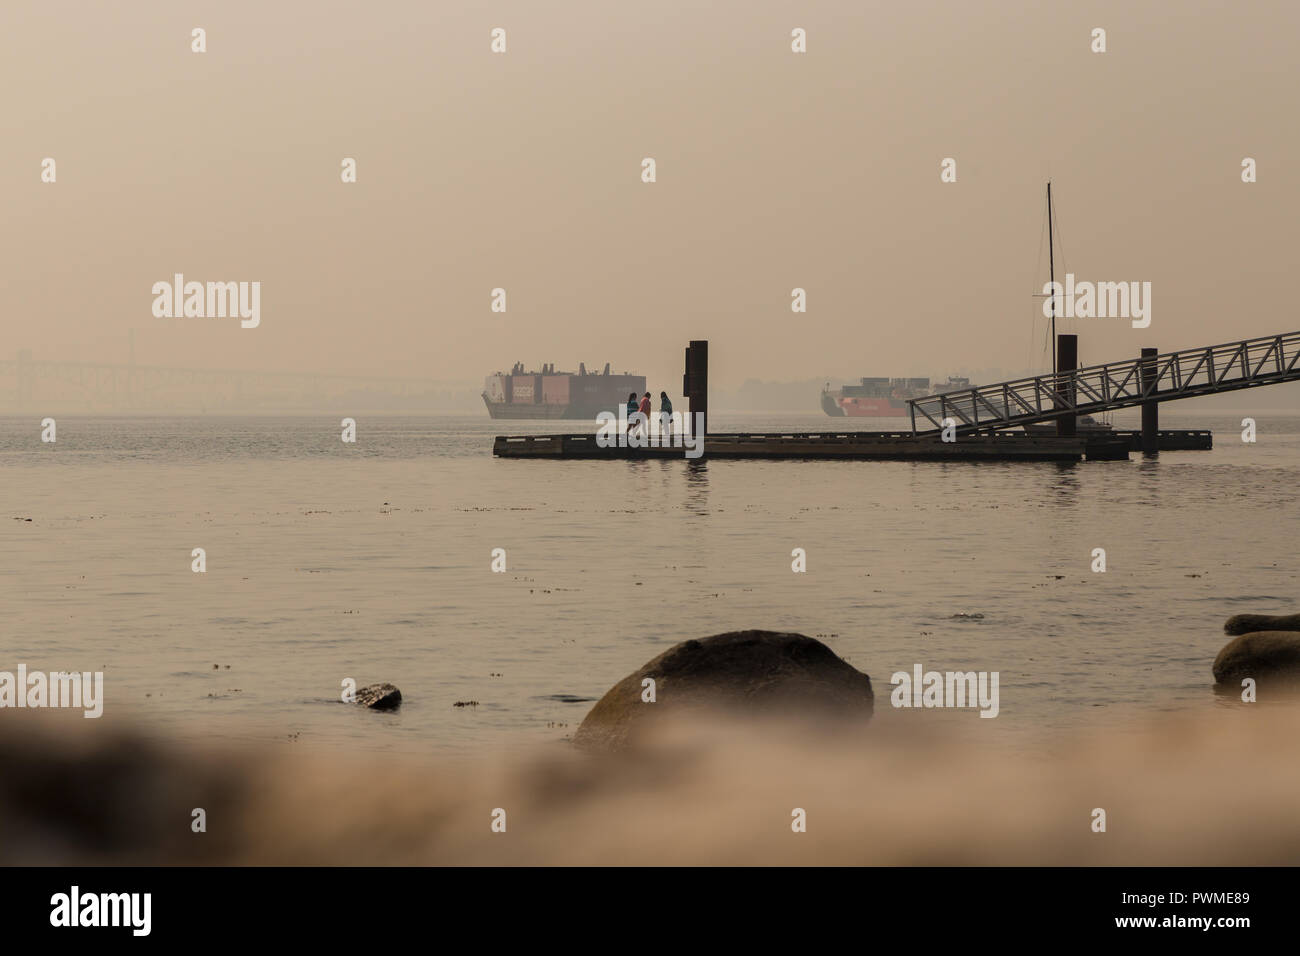 VANCOUVER, BC, CANADA - AUG 20, 2018: Children play on a dock near the ocean near a North Vancouver beach with the haze from forest fires obscurring the view. Stock Photo